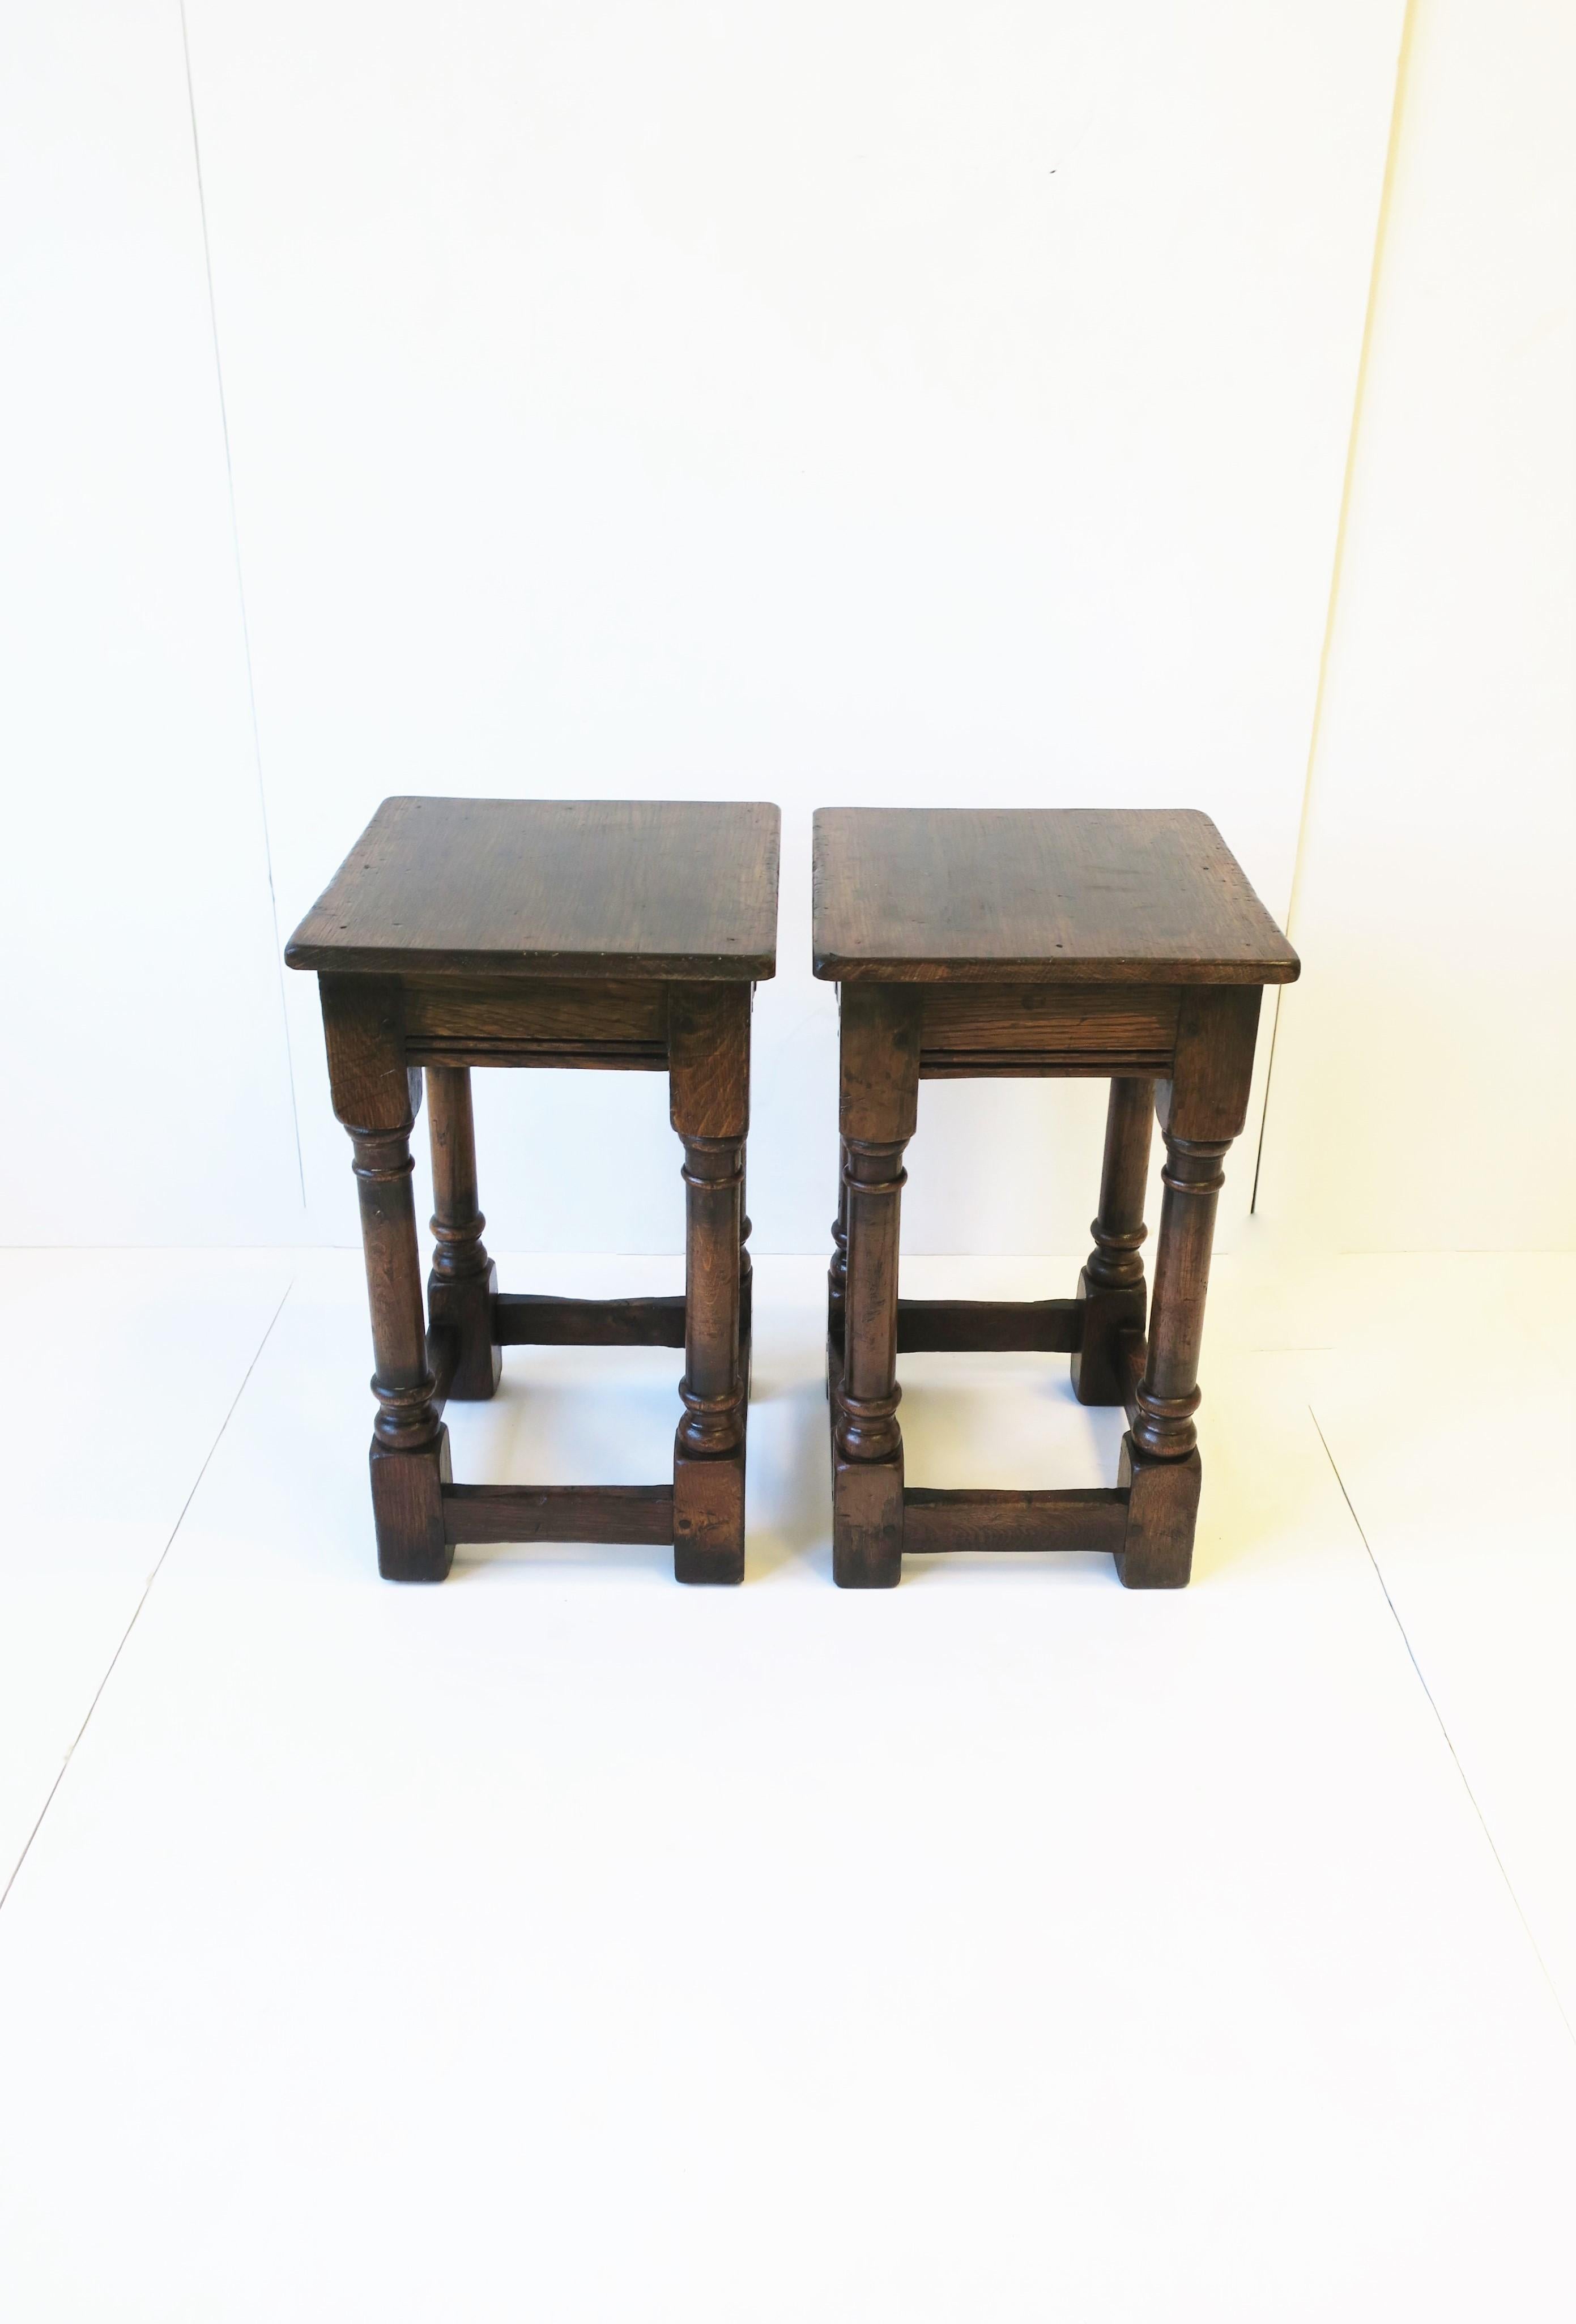 Varnished Jacobean Style Wood Side Tables or Stools